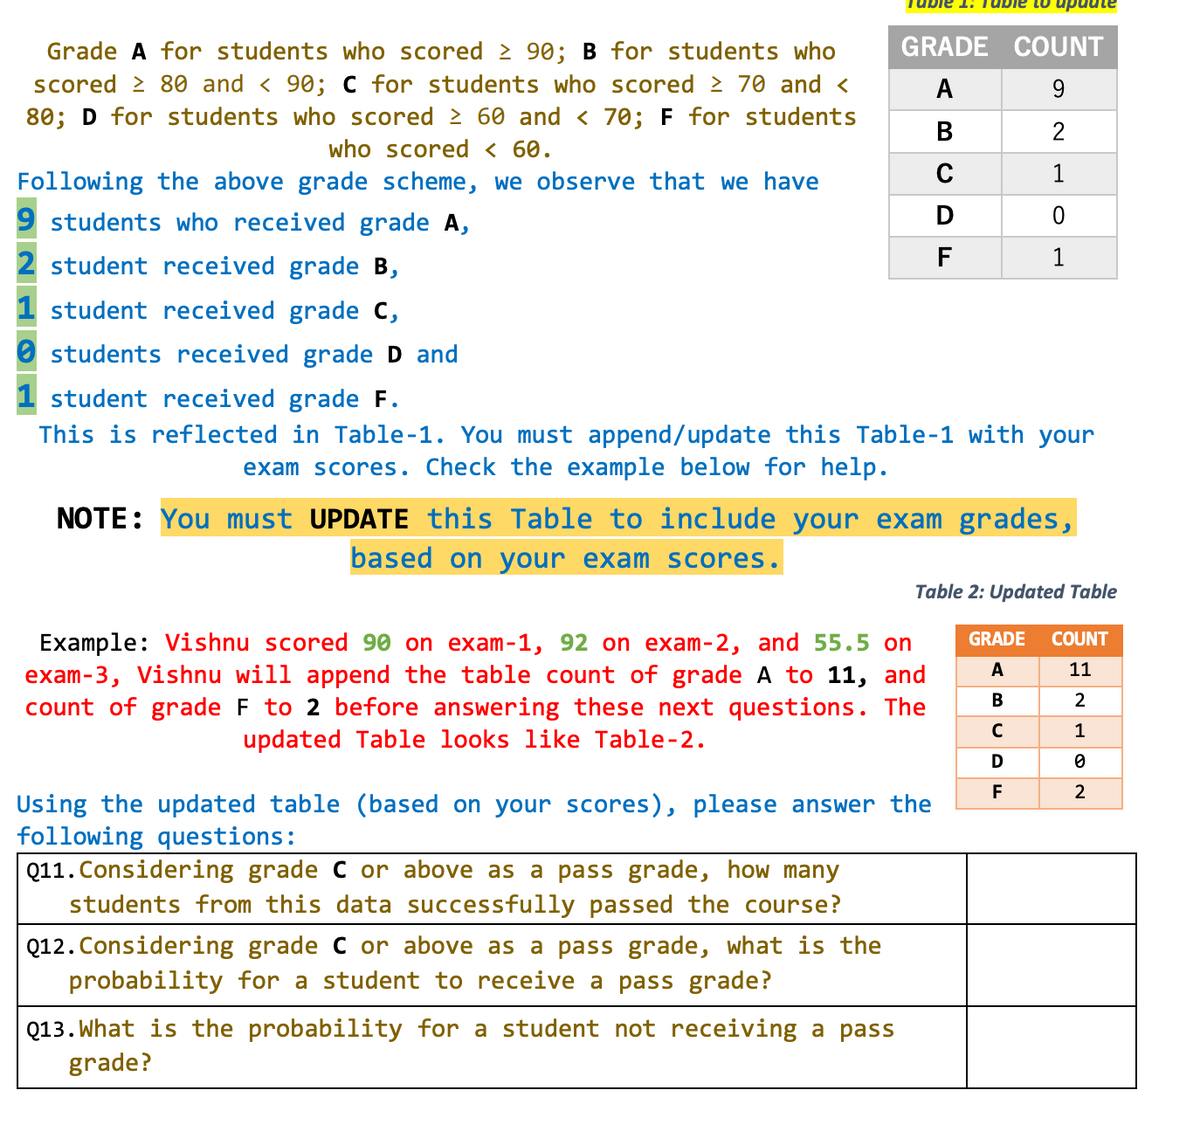 01 aian L:T
GRADE COUNT
Grade A for students who scored 2 90; B for students who
scored 2 80 and < 90; C for students who scored 2 70 and <
80; D for students who scored > 60 and < 70; F for students
who scored < 60.
Following the above grade scheme, we observe that we have
A
9.
В
2
1
students who received grade A,
2 student received grade B,
F
1
student received grade c,
O students received grade D and
1 student received grade F.
This is reflected in Table-1. You must append/update this Table-1 with your
exam scores. Check the example below for help.
NOTE: You must UPDATE this Table to include your exam grades,
based on your exam scores.
Table 2: Updated Table
GRADE
COUNT
Example: Vishnu scored 90 on exam-1, 92 on exam-2, and 55.5 on
exam-3, Vishnu will append the table count of grade A to 11, and
count of grade F to 2 before answering these next questions. The
updated Table looks like Table-2.
A
11
В
2
C
1
D
F
2
Using the updated table (based on your scores), please answer the
following questions:
Q11. Considering grade C or above as a pass grade, how many
students from this data successfully passed the course?
Q12. Considering grade C or above as a pass grade, what is the
probability for a student to receive a pass grade?
Q13. What is the probability for a student not receiving a pass
grade?
